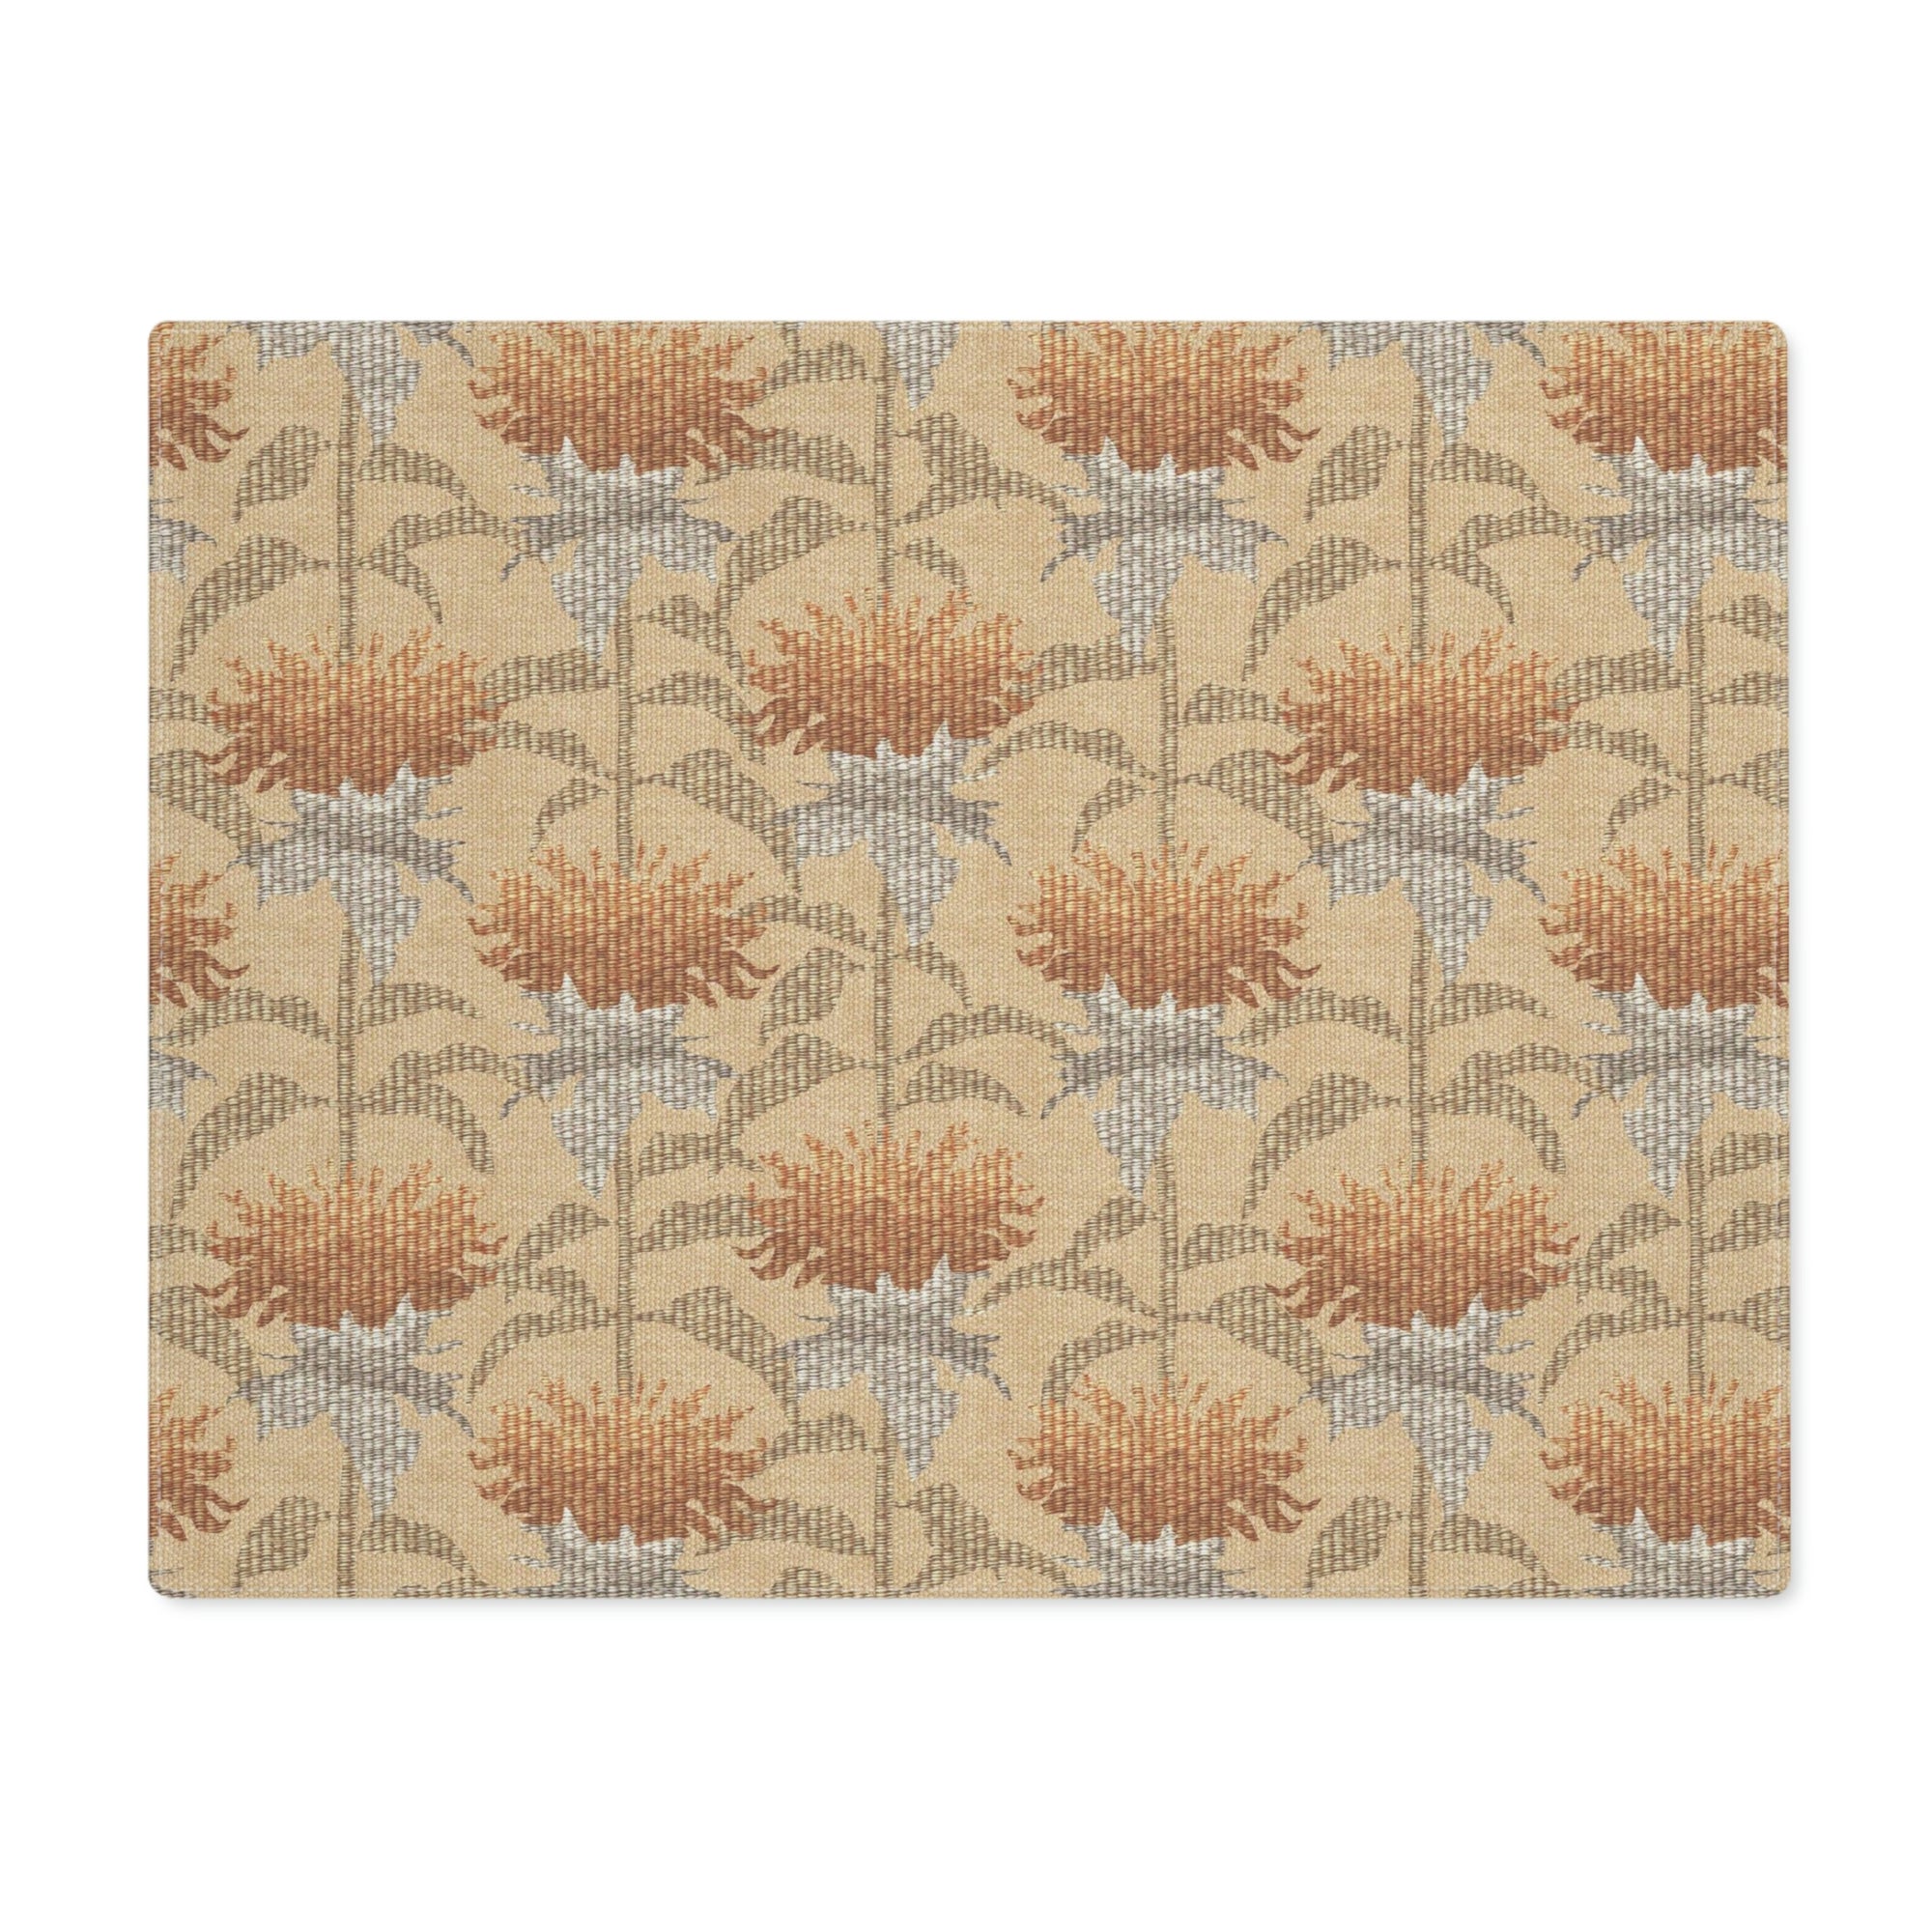 Bee Balm Placemat in Orange